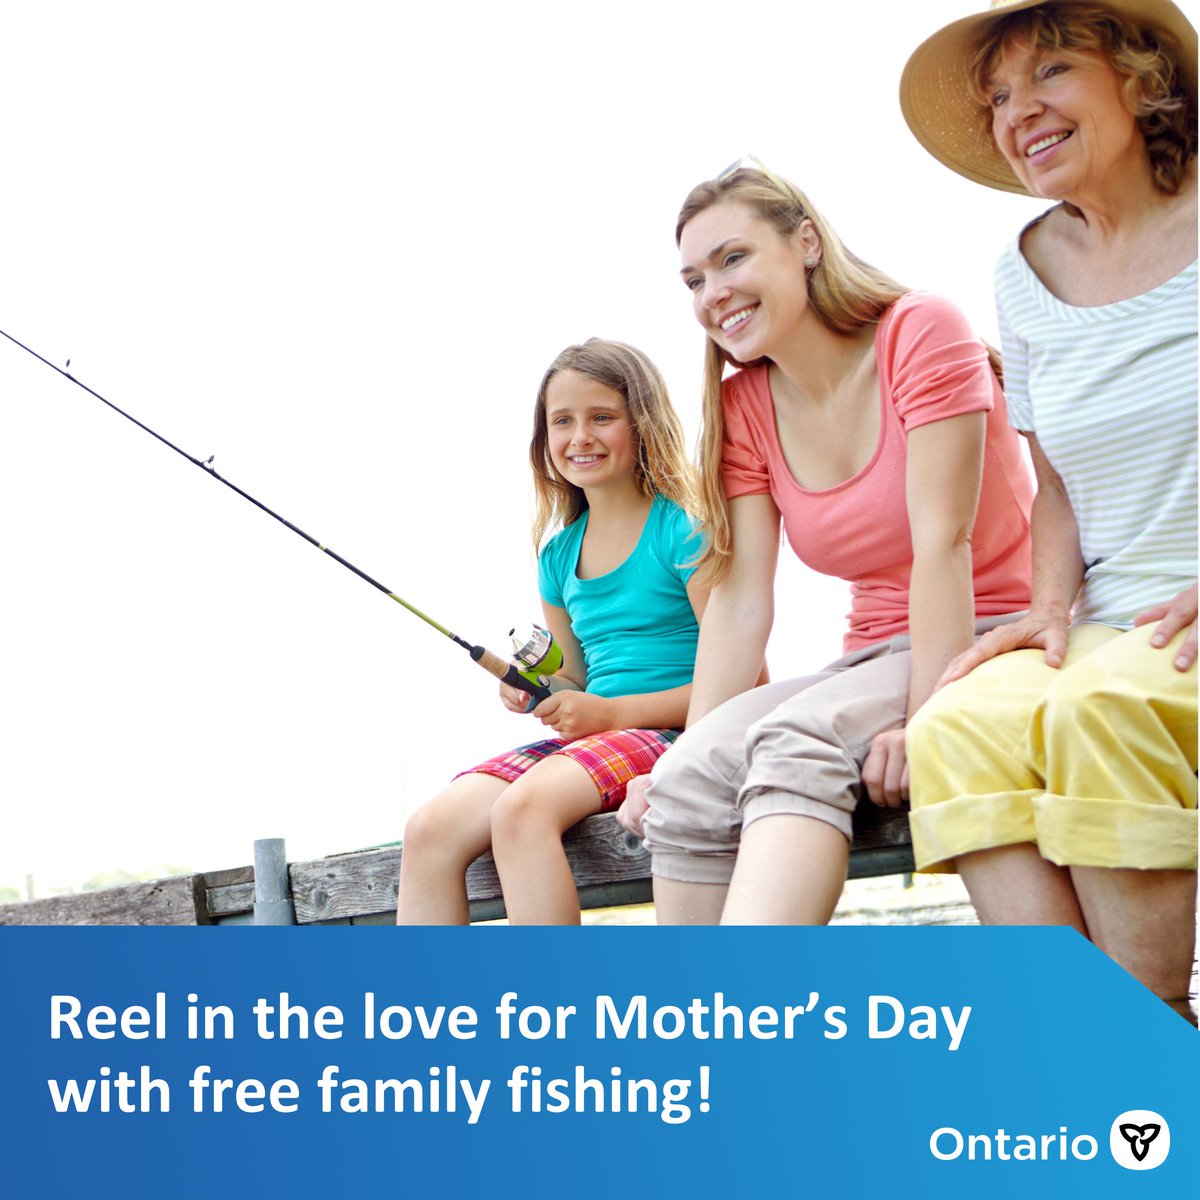 Interested in giving fishing a try? This Mother’s Day weekend is a great time to start with free family fishing. No license is required! Learn more: Ontario.ca/freefishing news.ontario.ca/en/release/100…